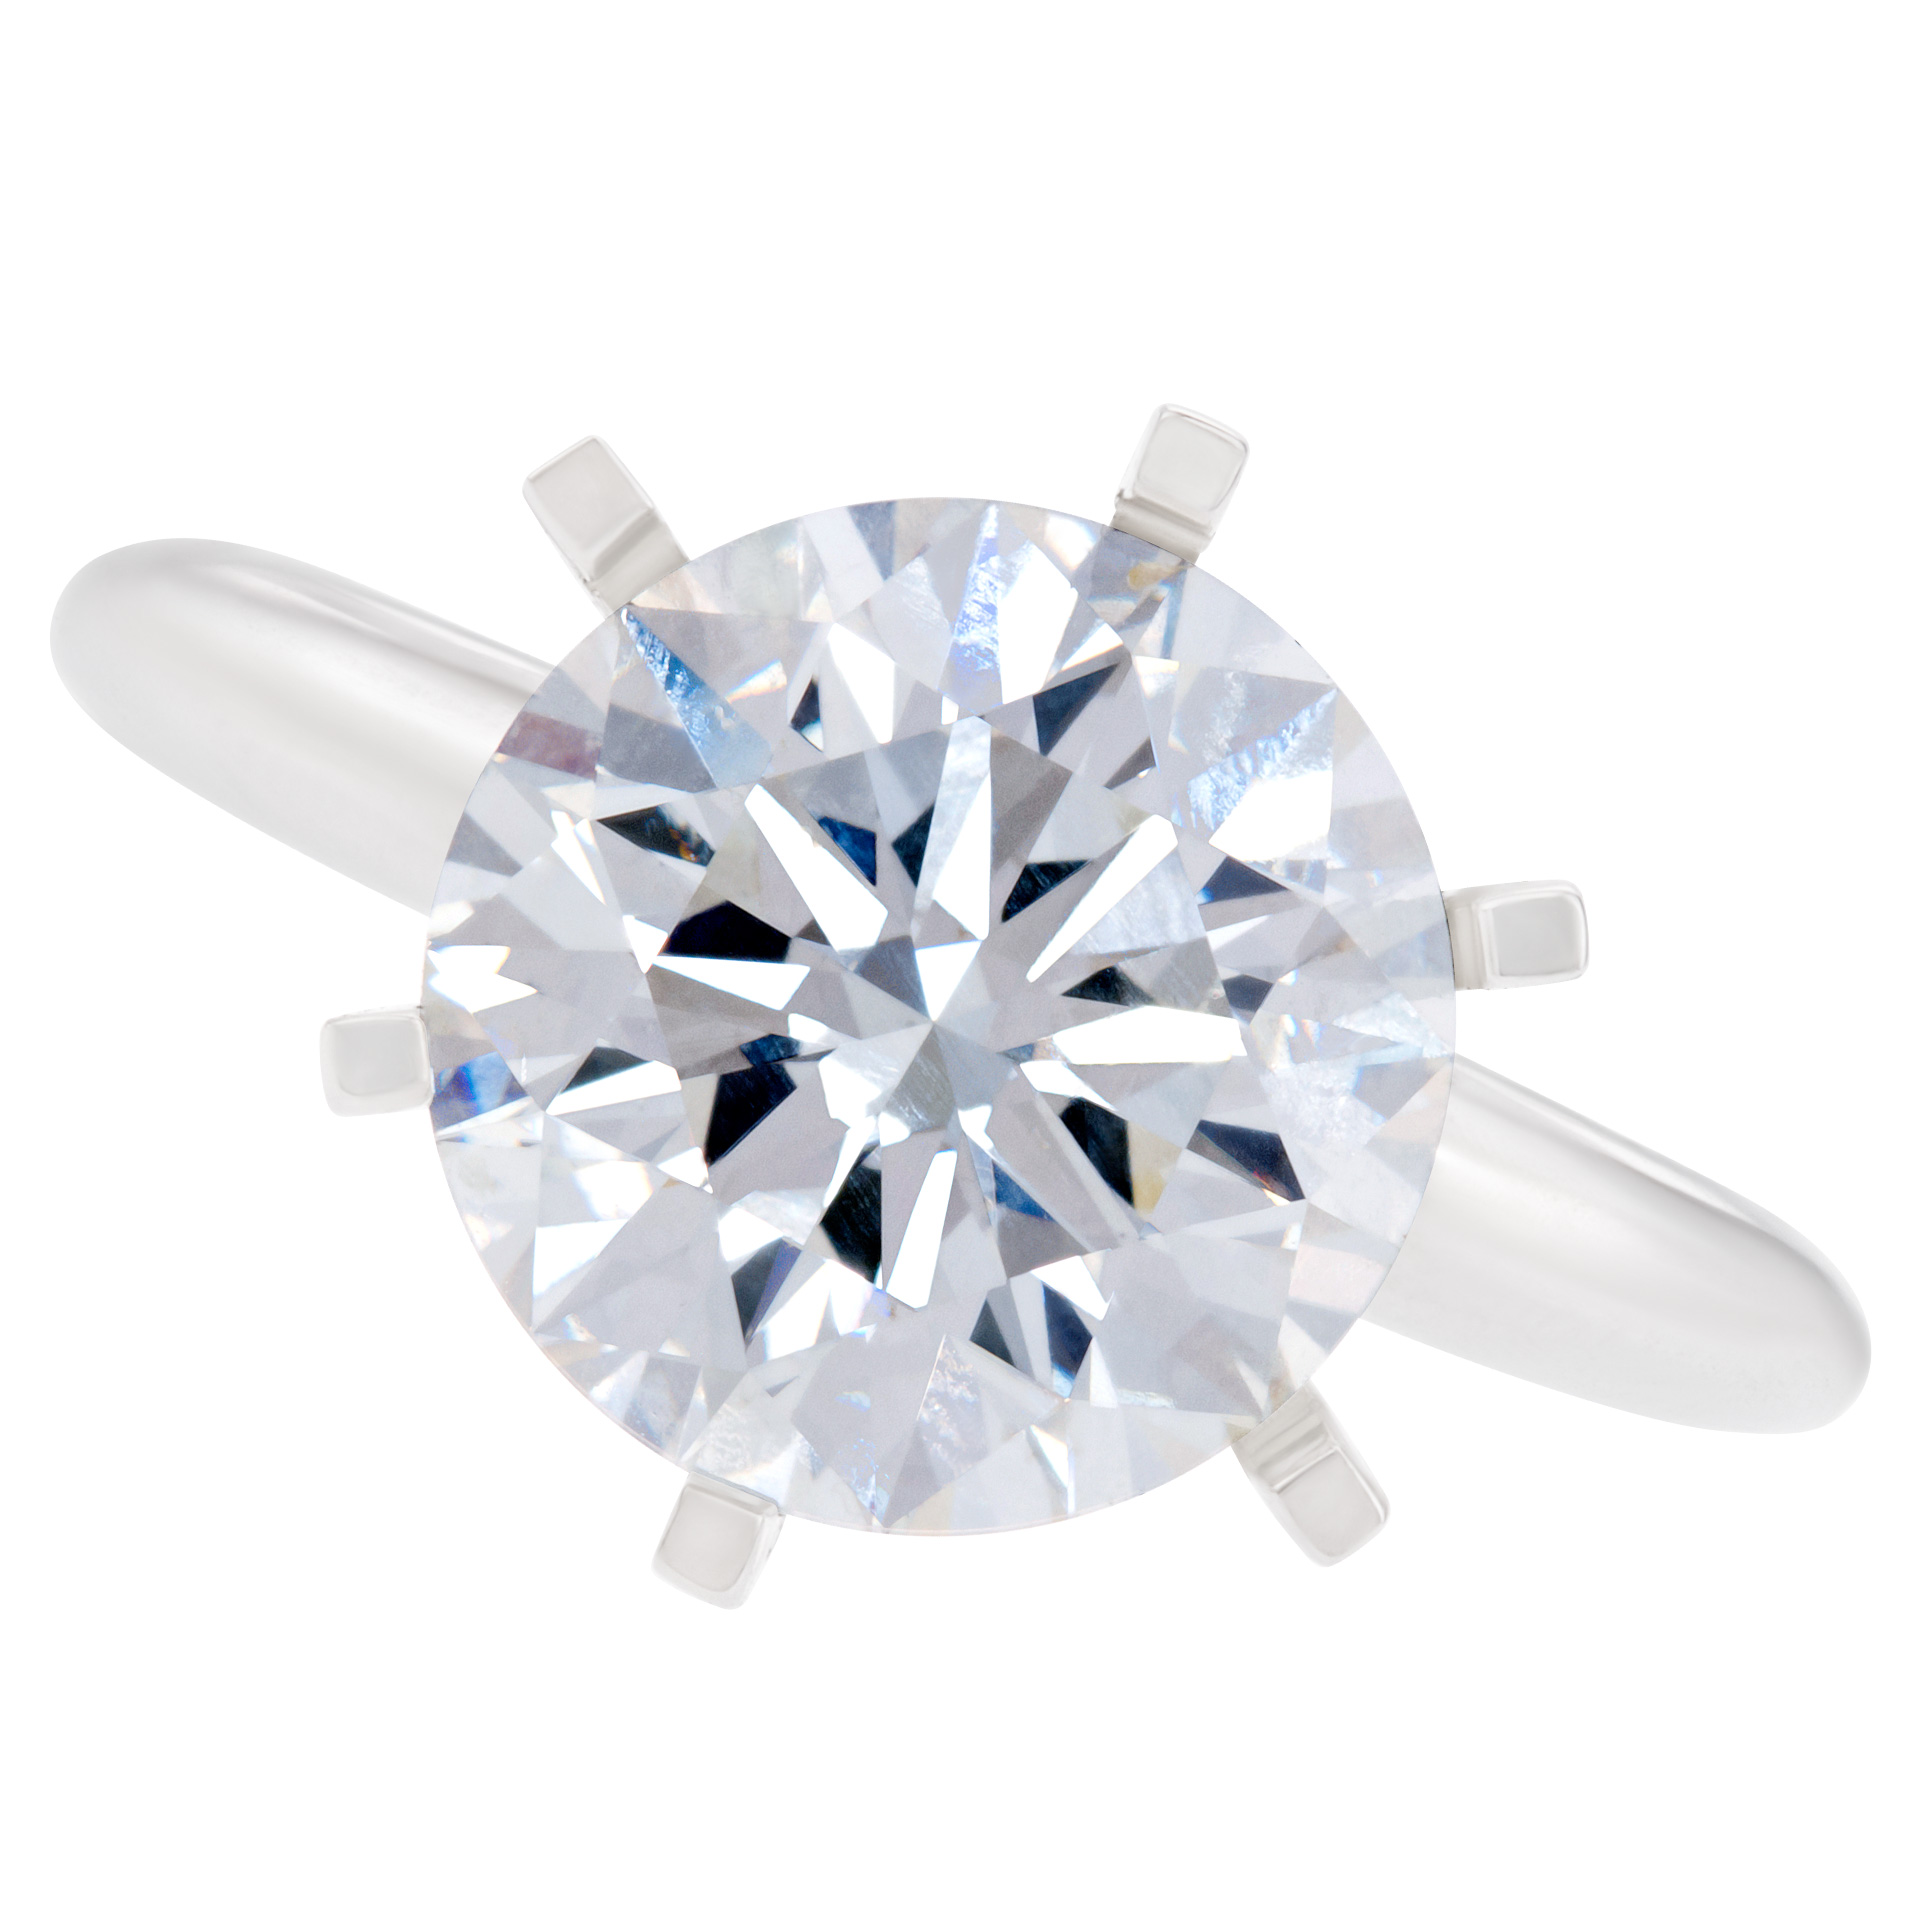 Gia Certified Round Diamond 4.01 Cts (J Color Si-1 Clarity) image 1